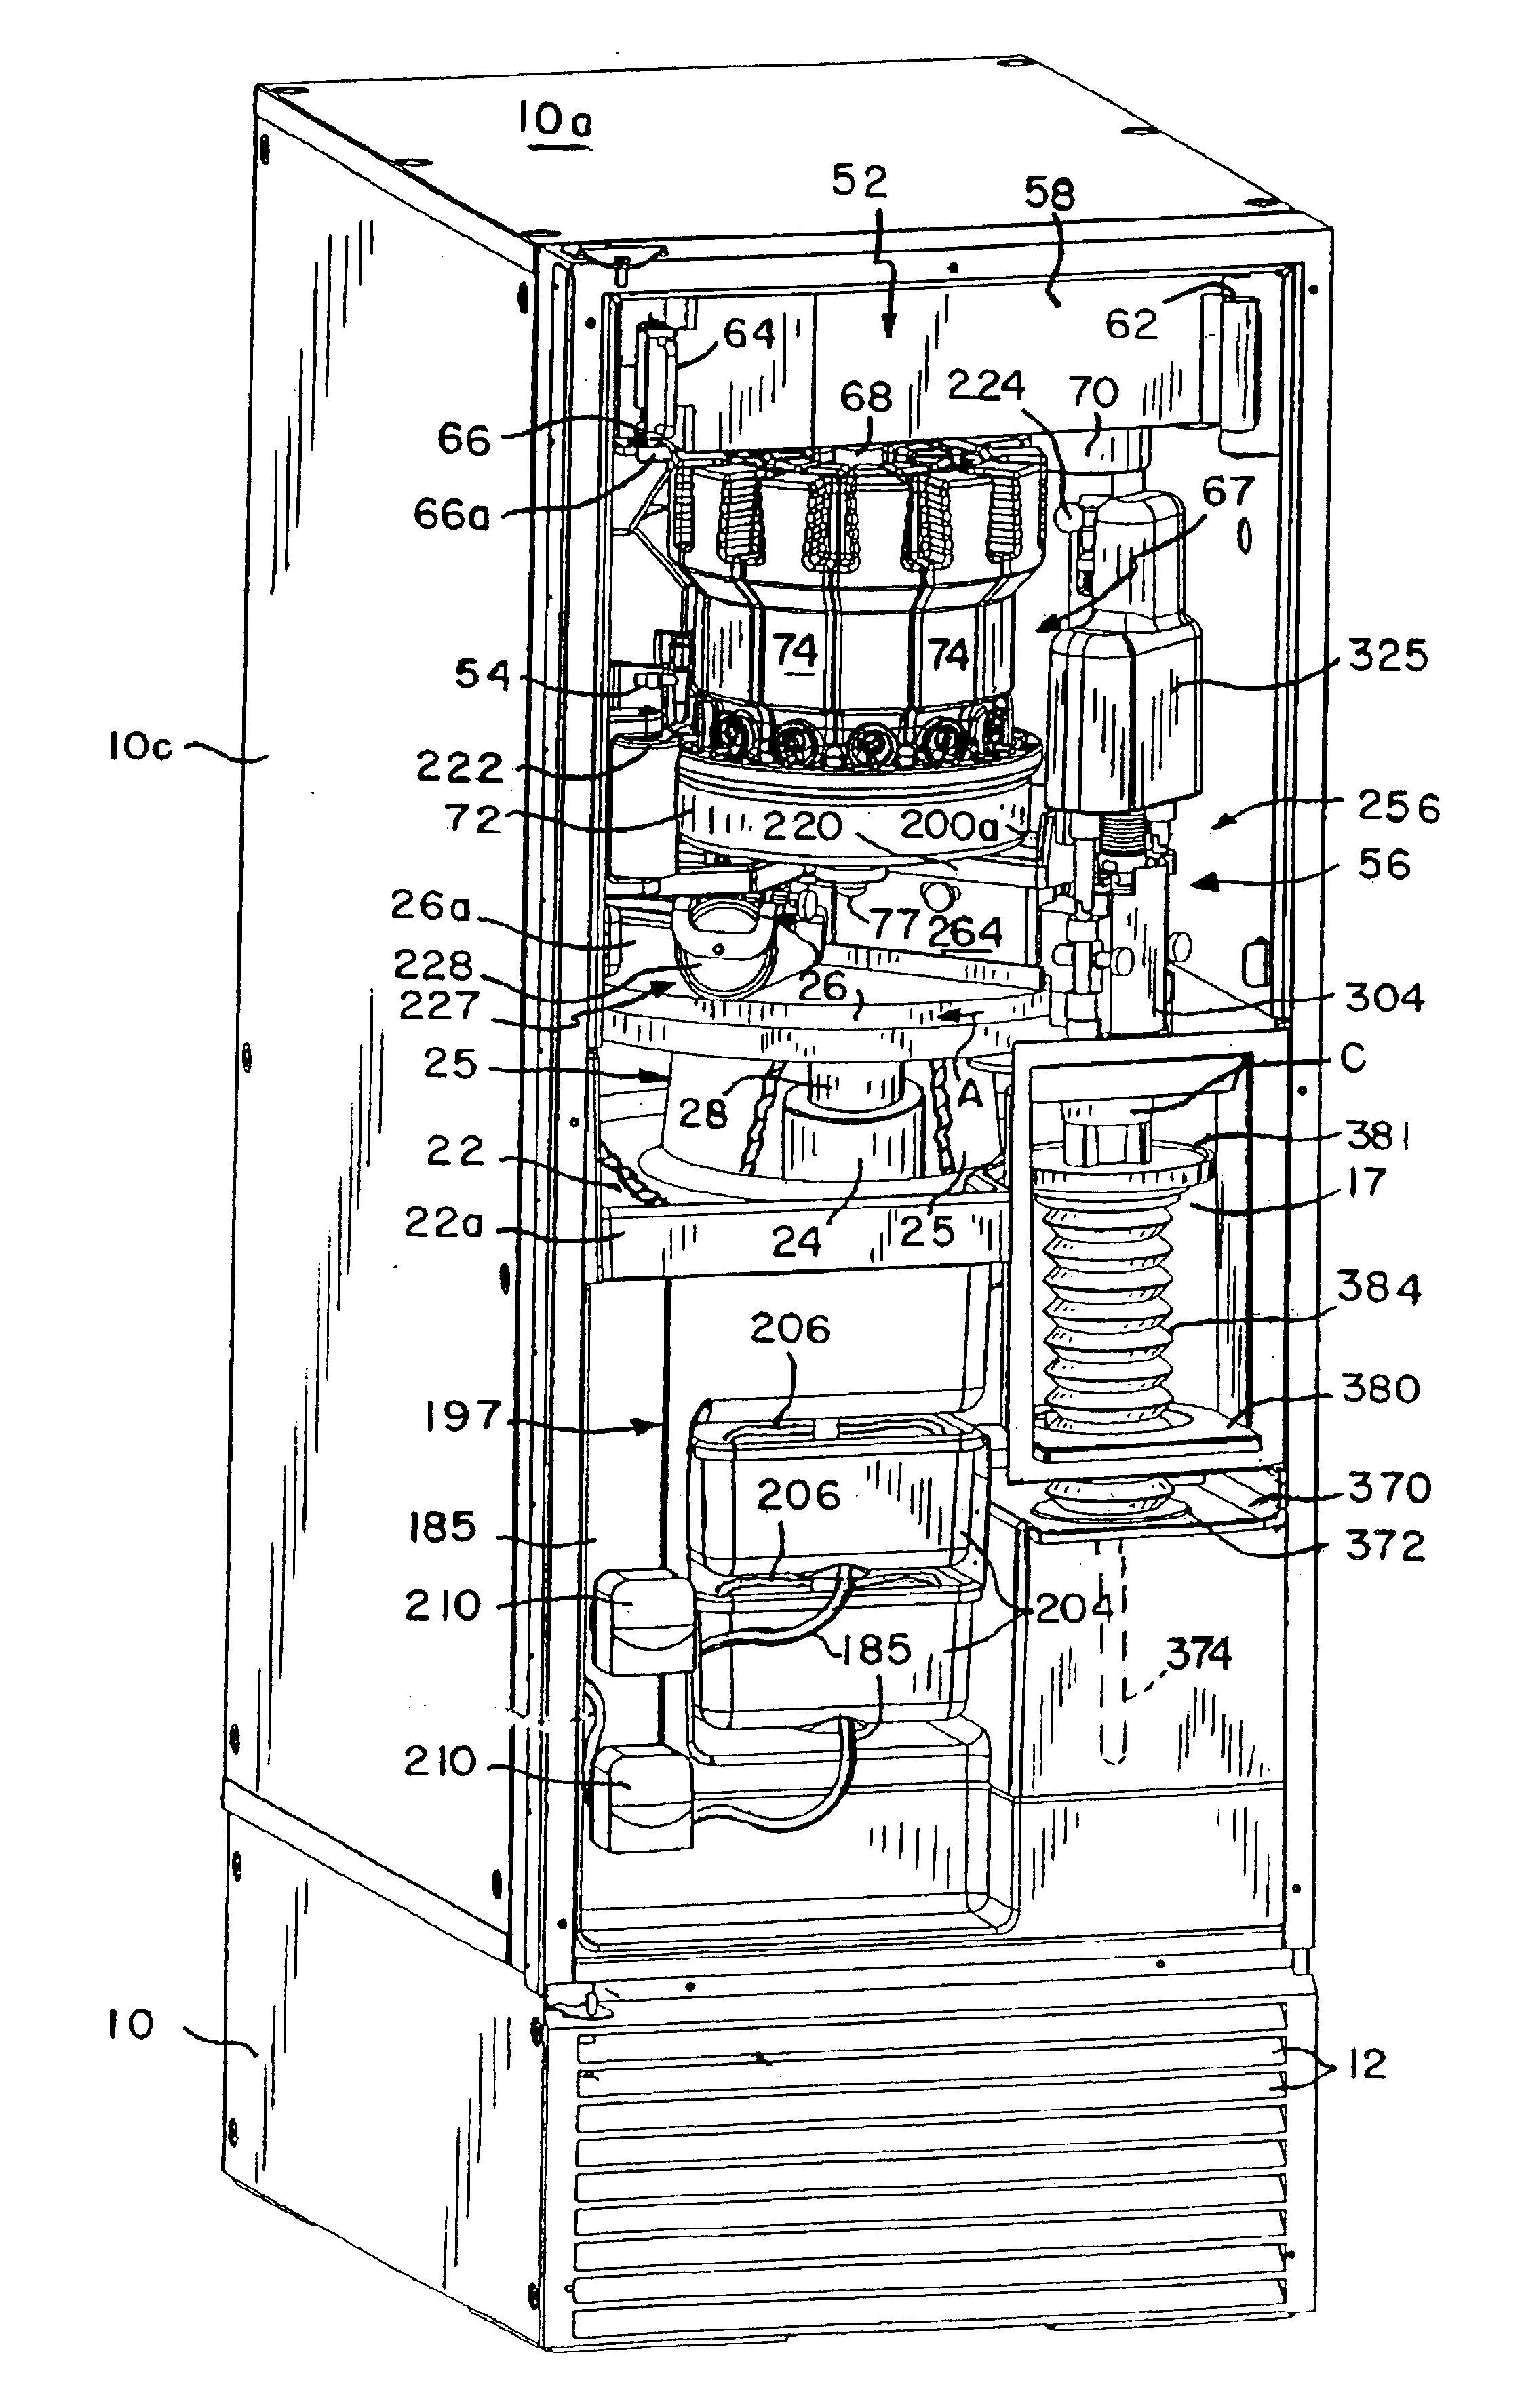 Method for producing and dispensing an aerated and/or blended food product